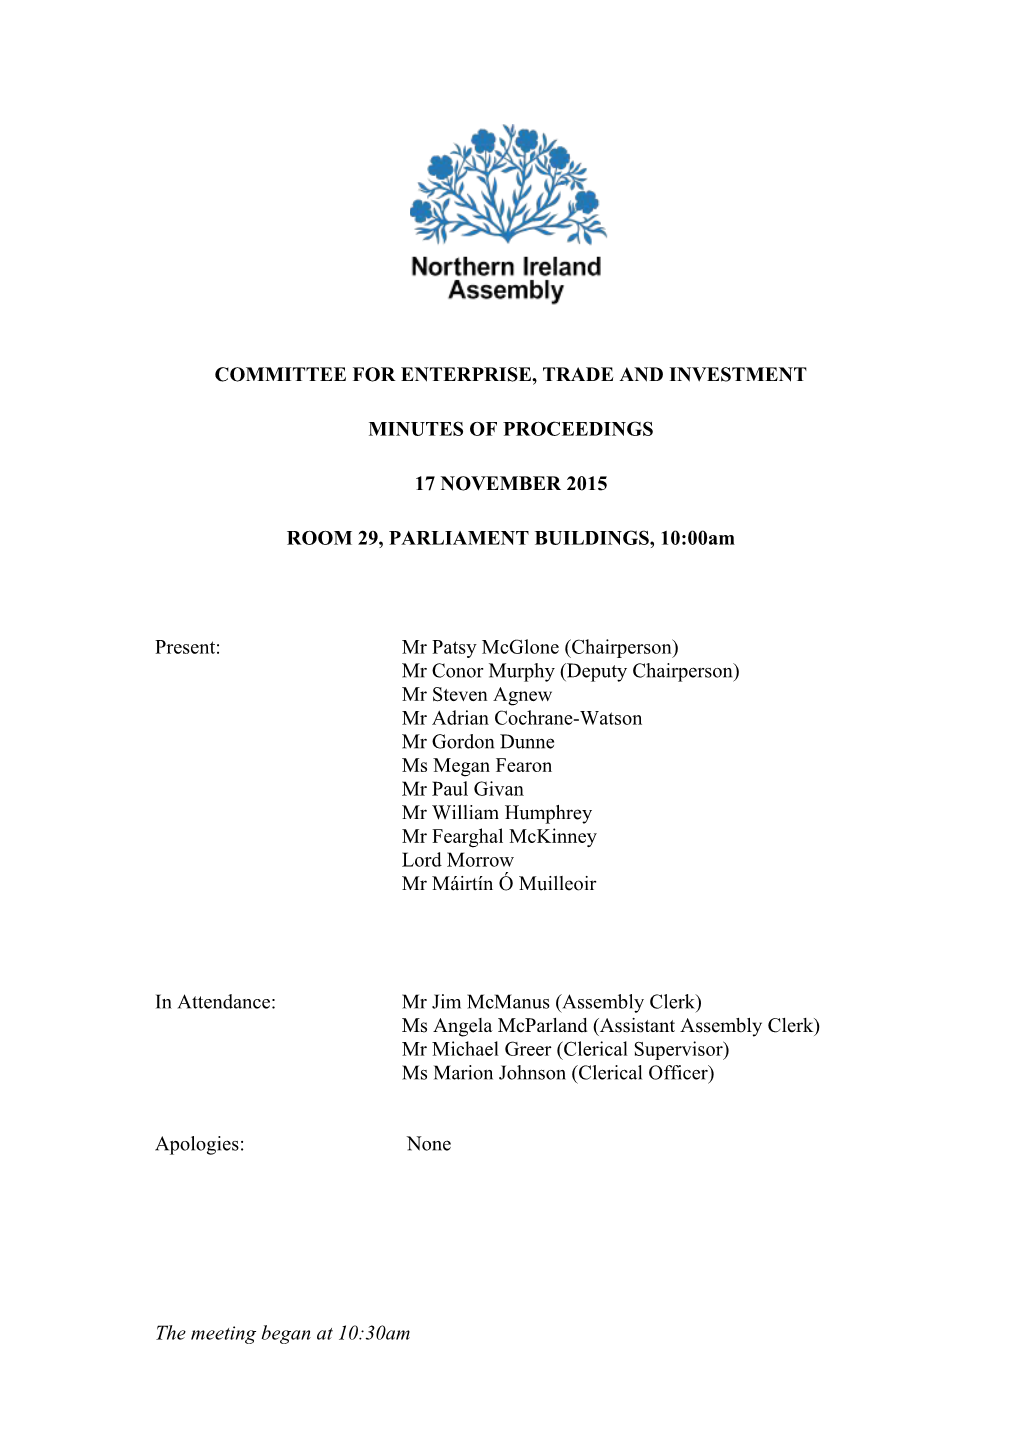 COMMITTEE for Enterprise, Trade and Investment